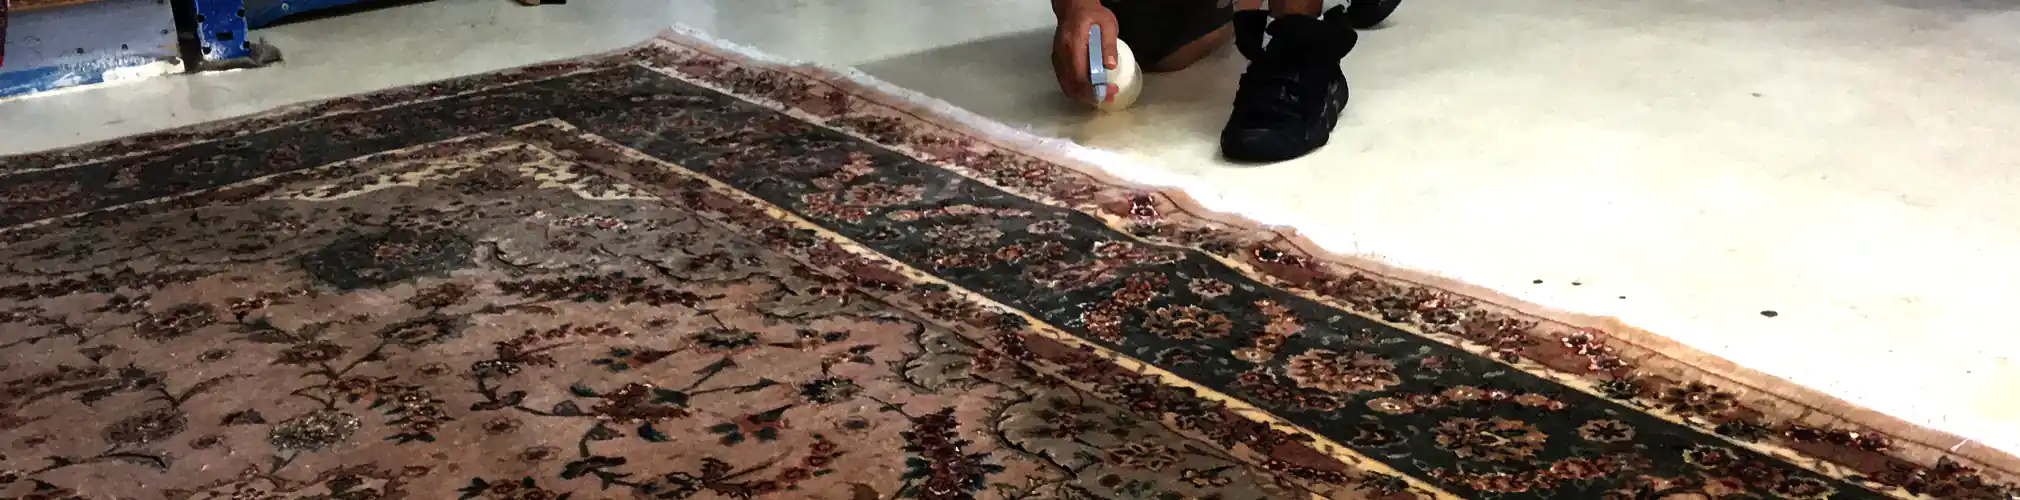 Rug Fringe Cleaning Process Miami